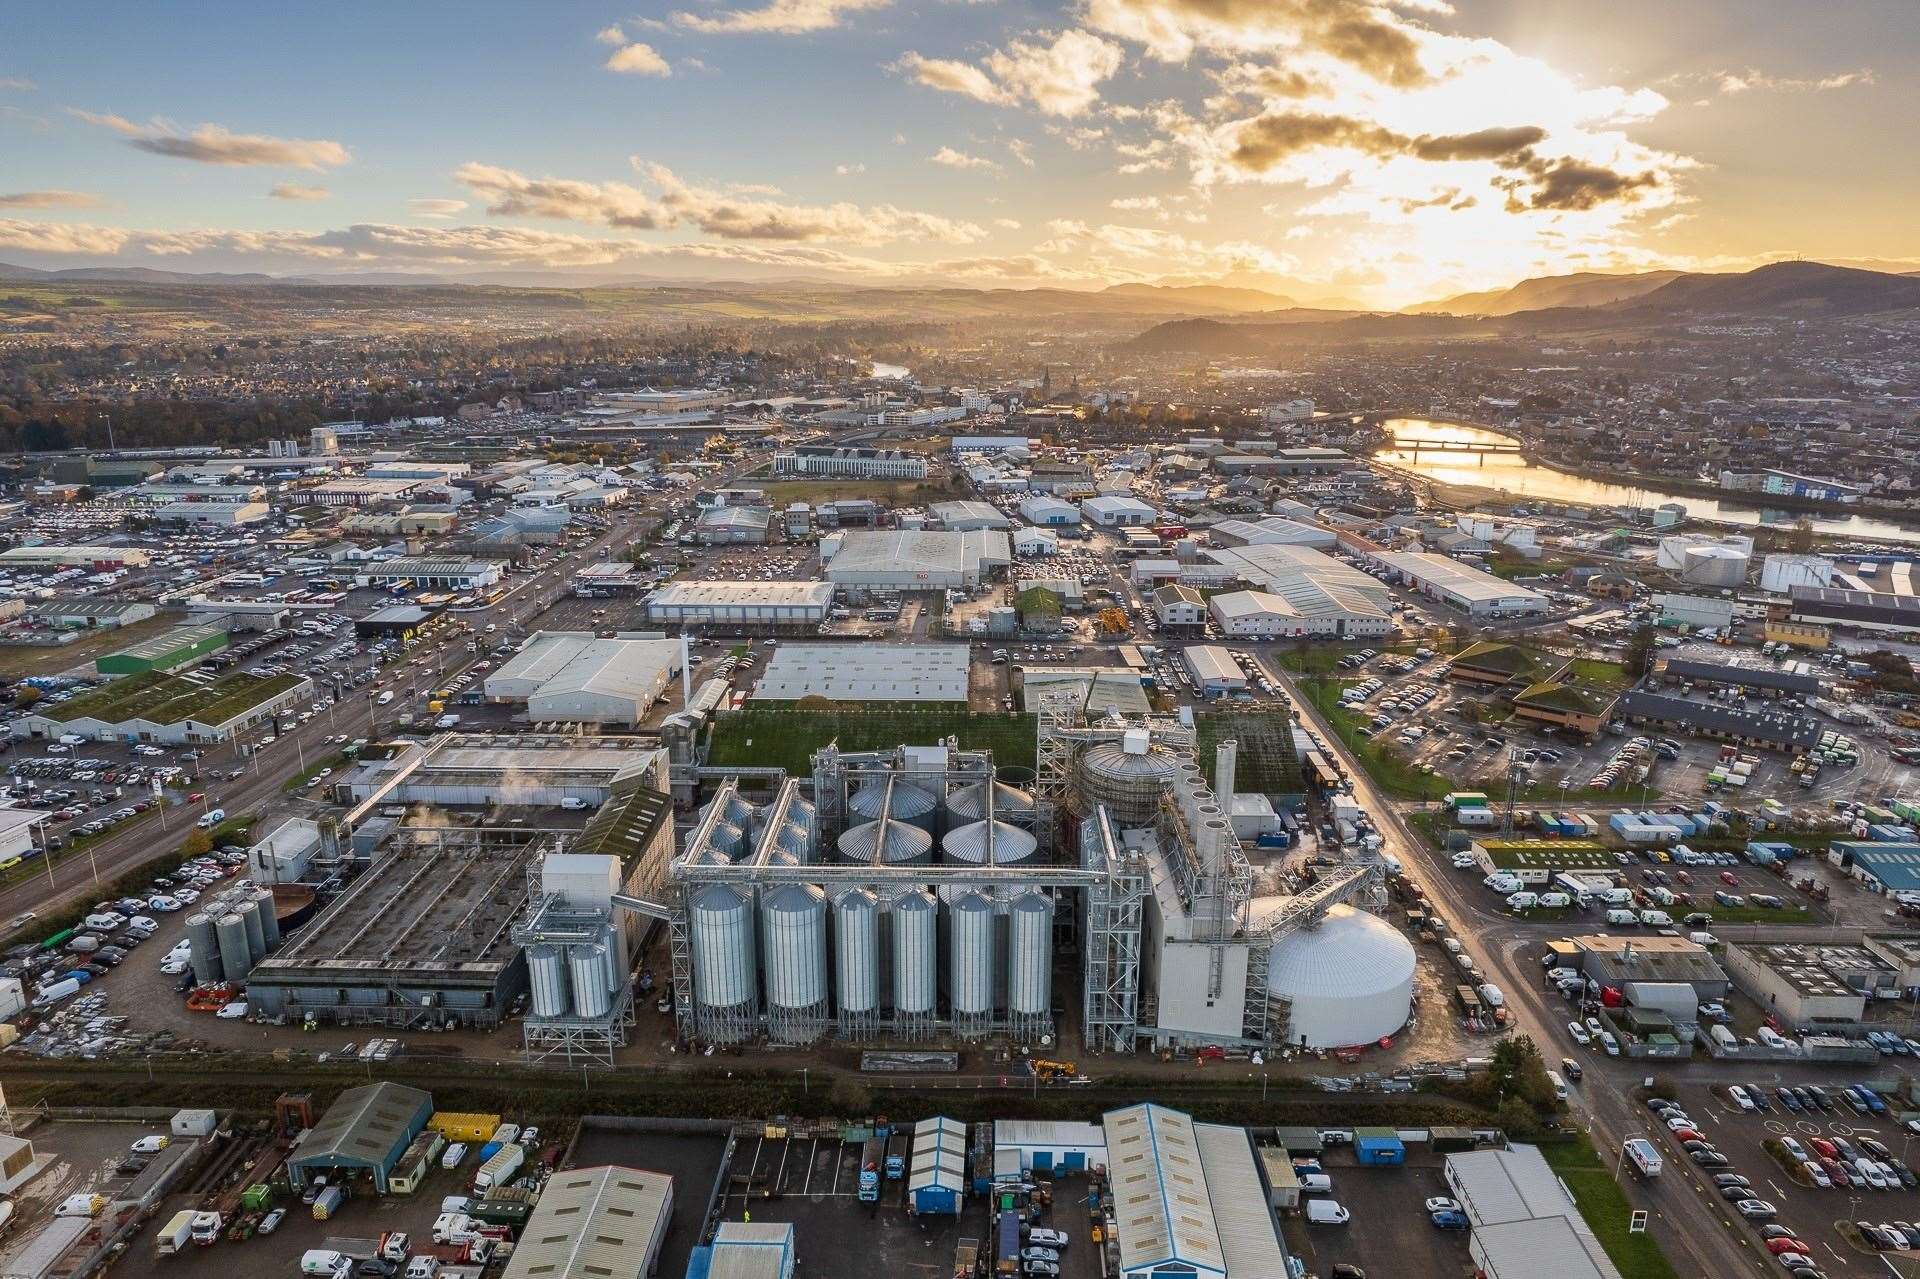 Bairds Malt has announced further expansion plans for its site in Inverness.